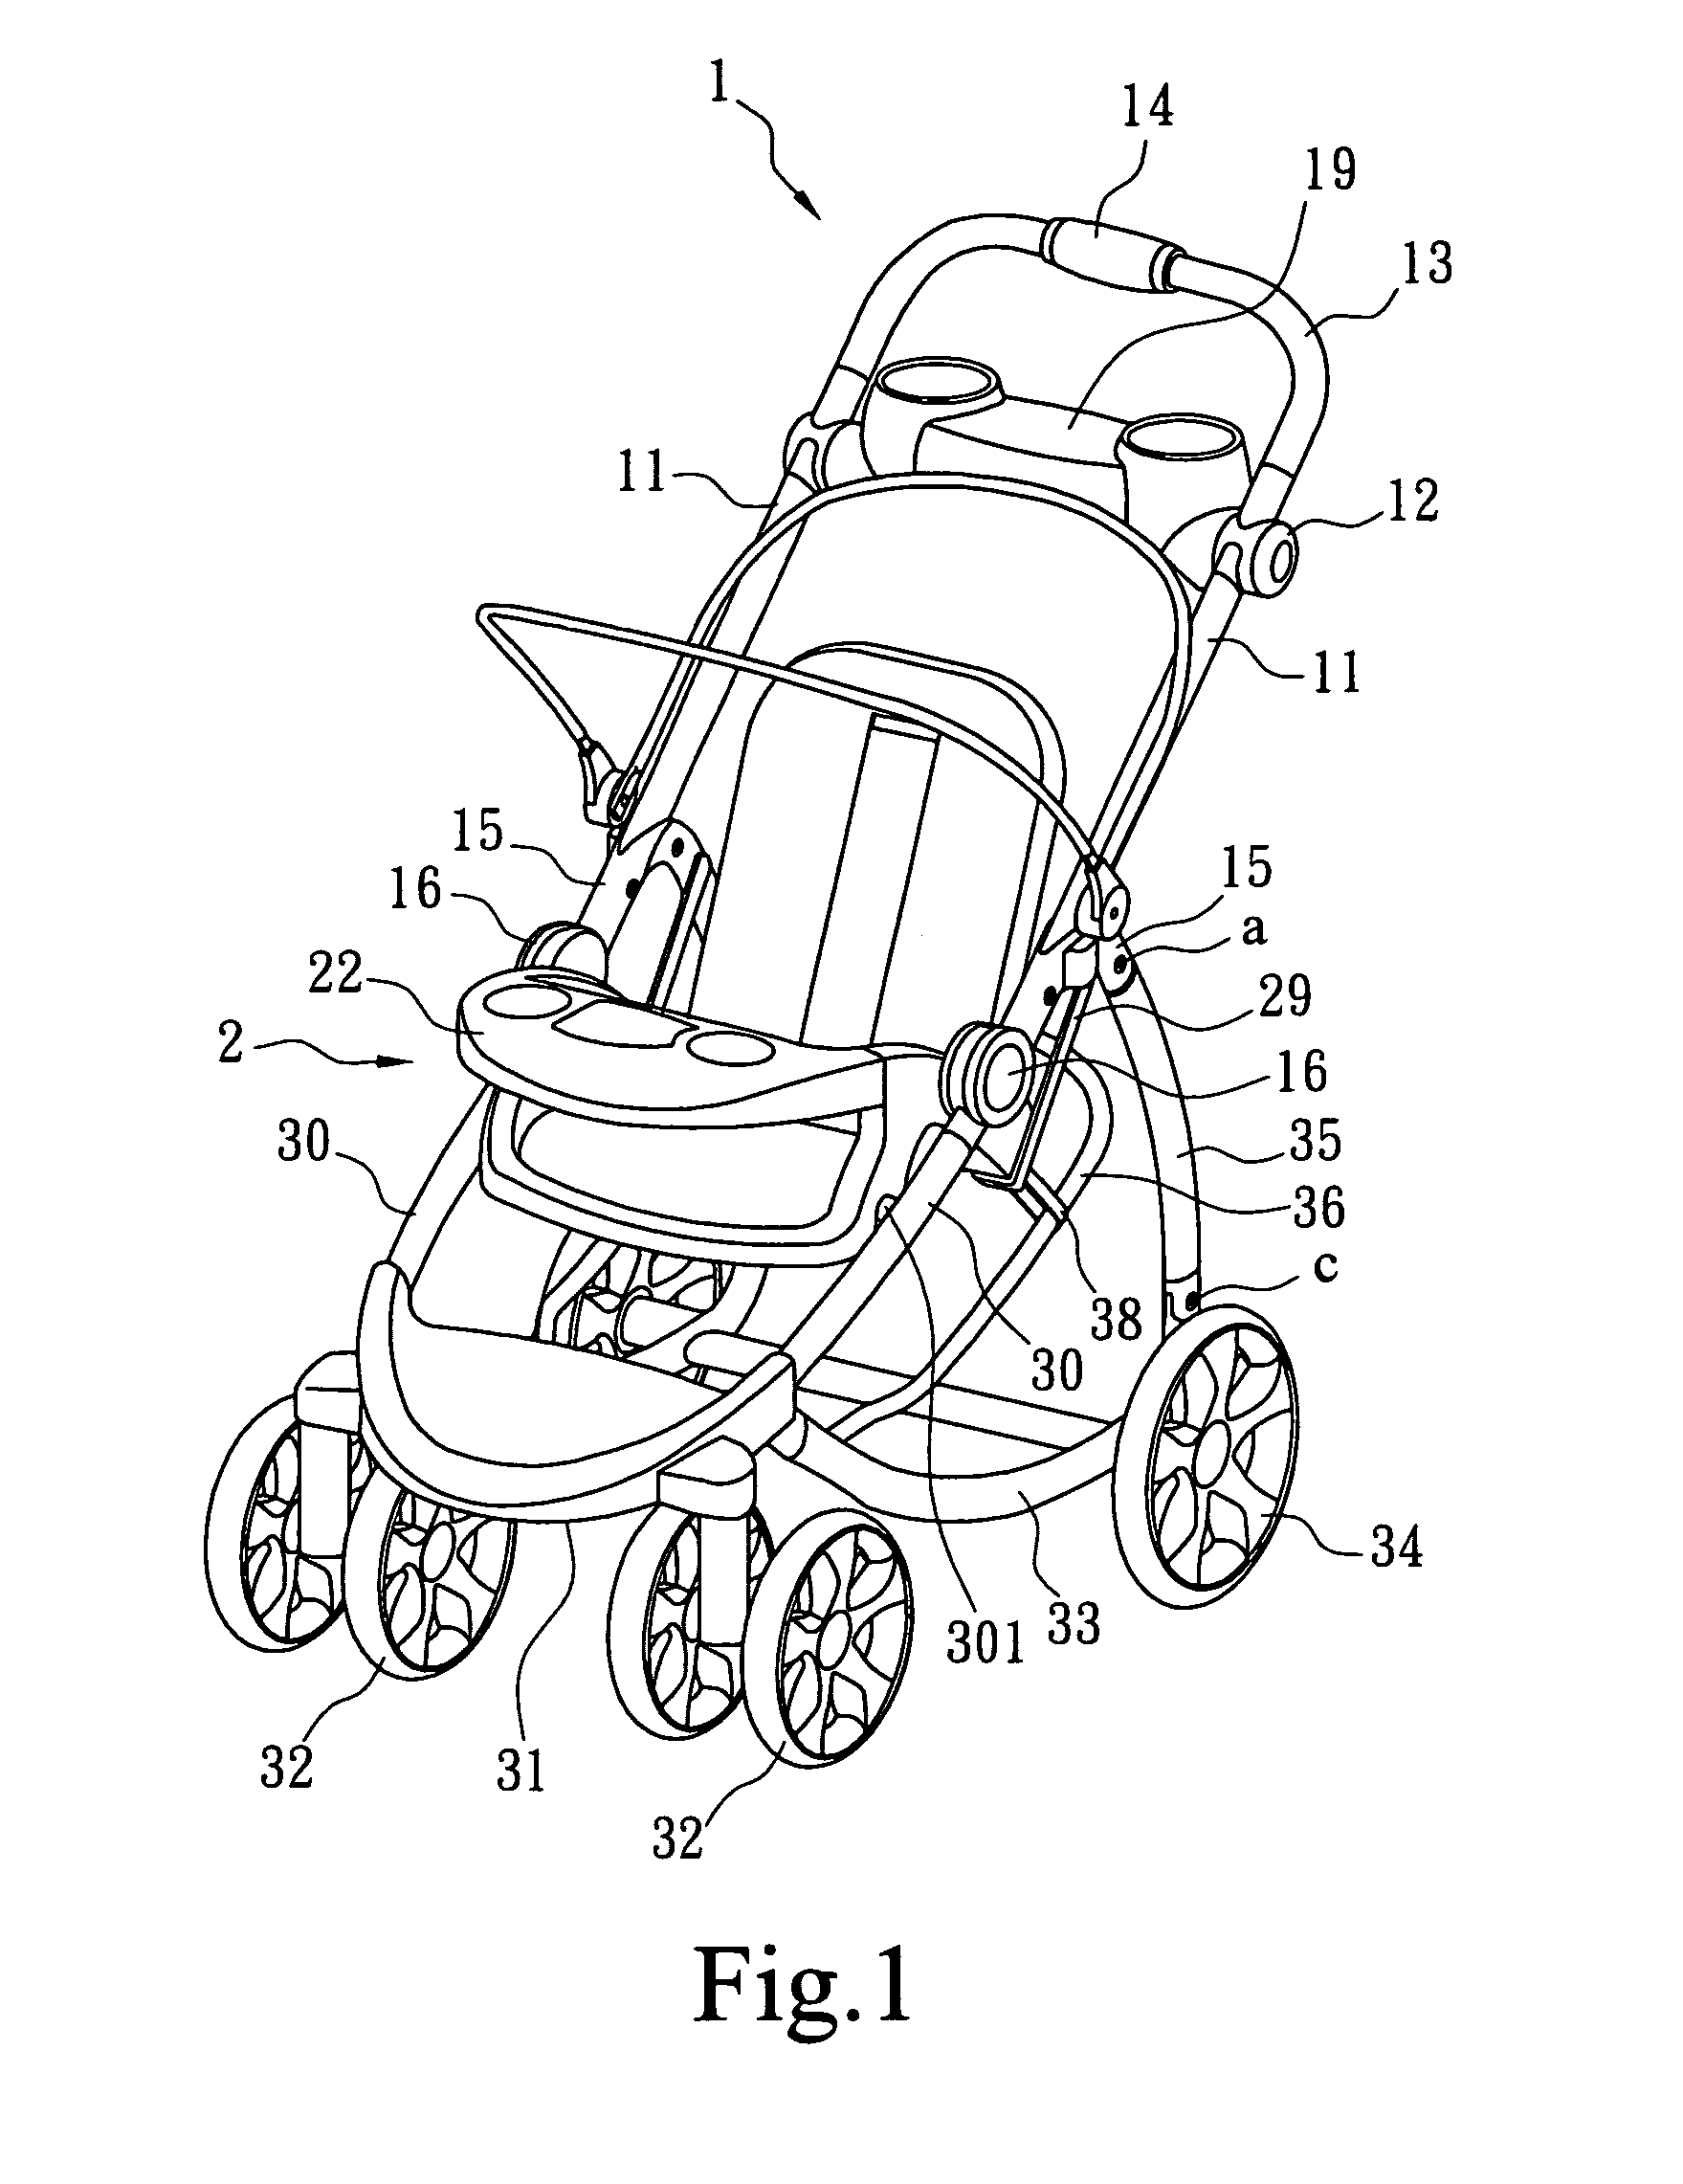 Collapsible stroller